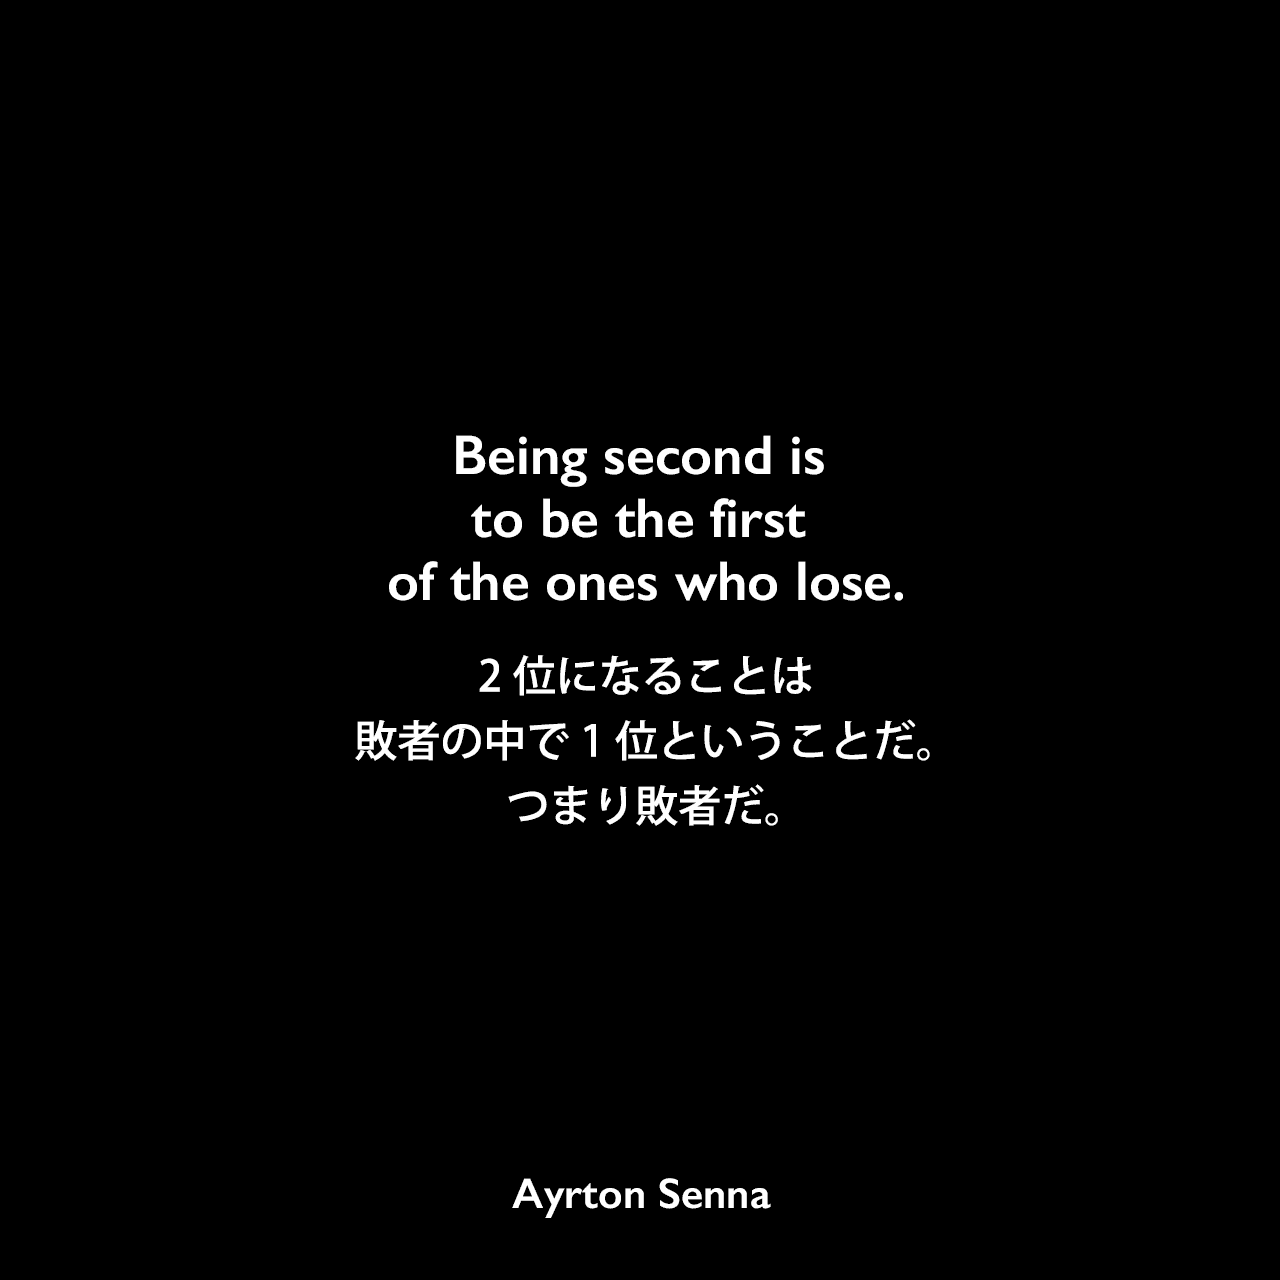 Being second is to be the first of the ones who lose.2位になることは、敗者の中で1位ということだ。つまり敗者だ。